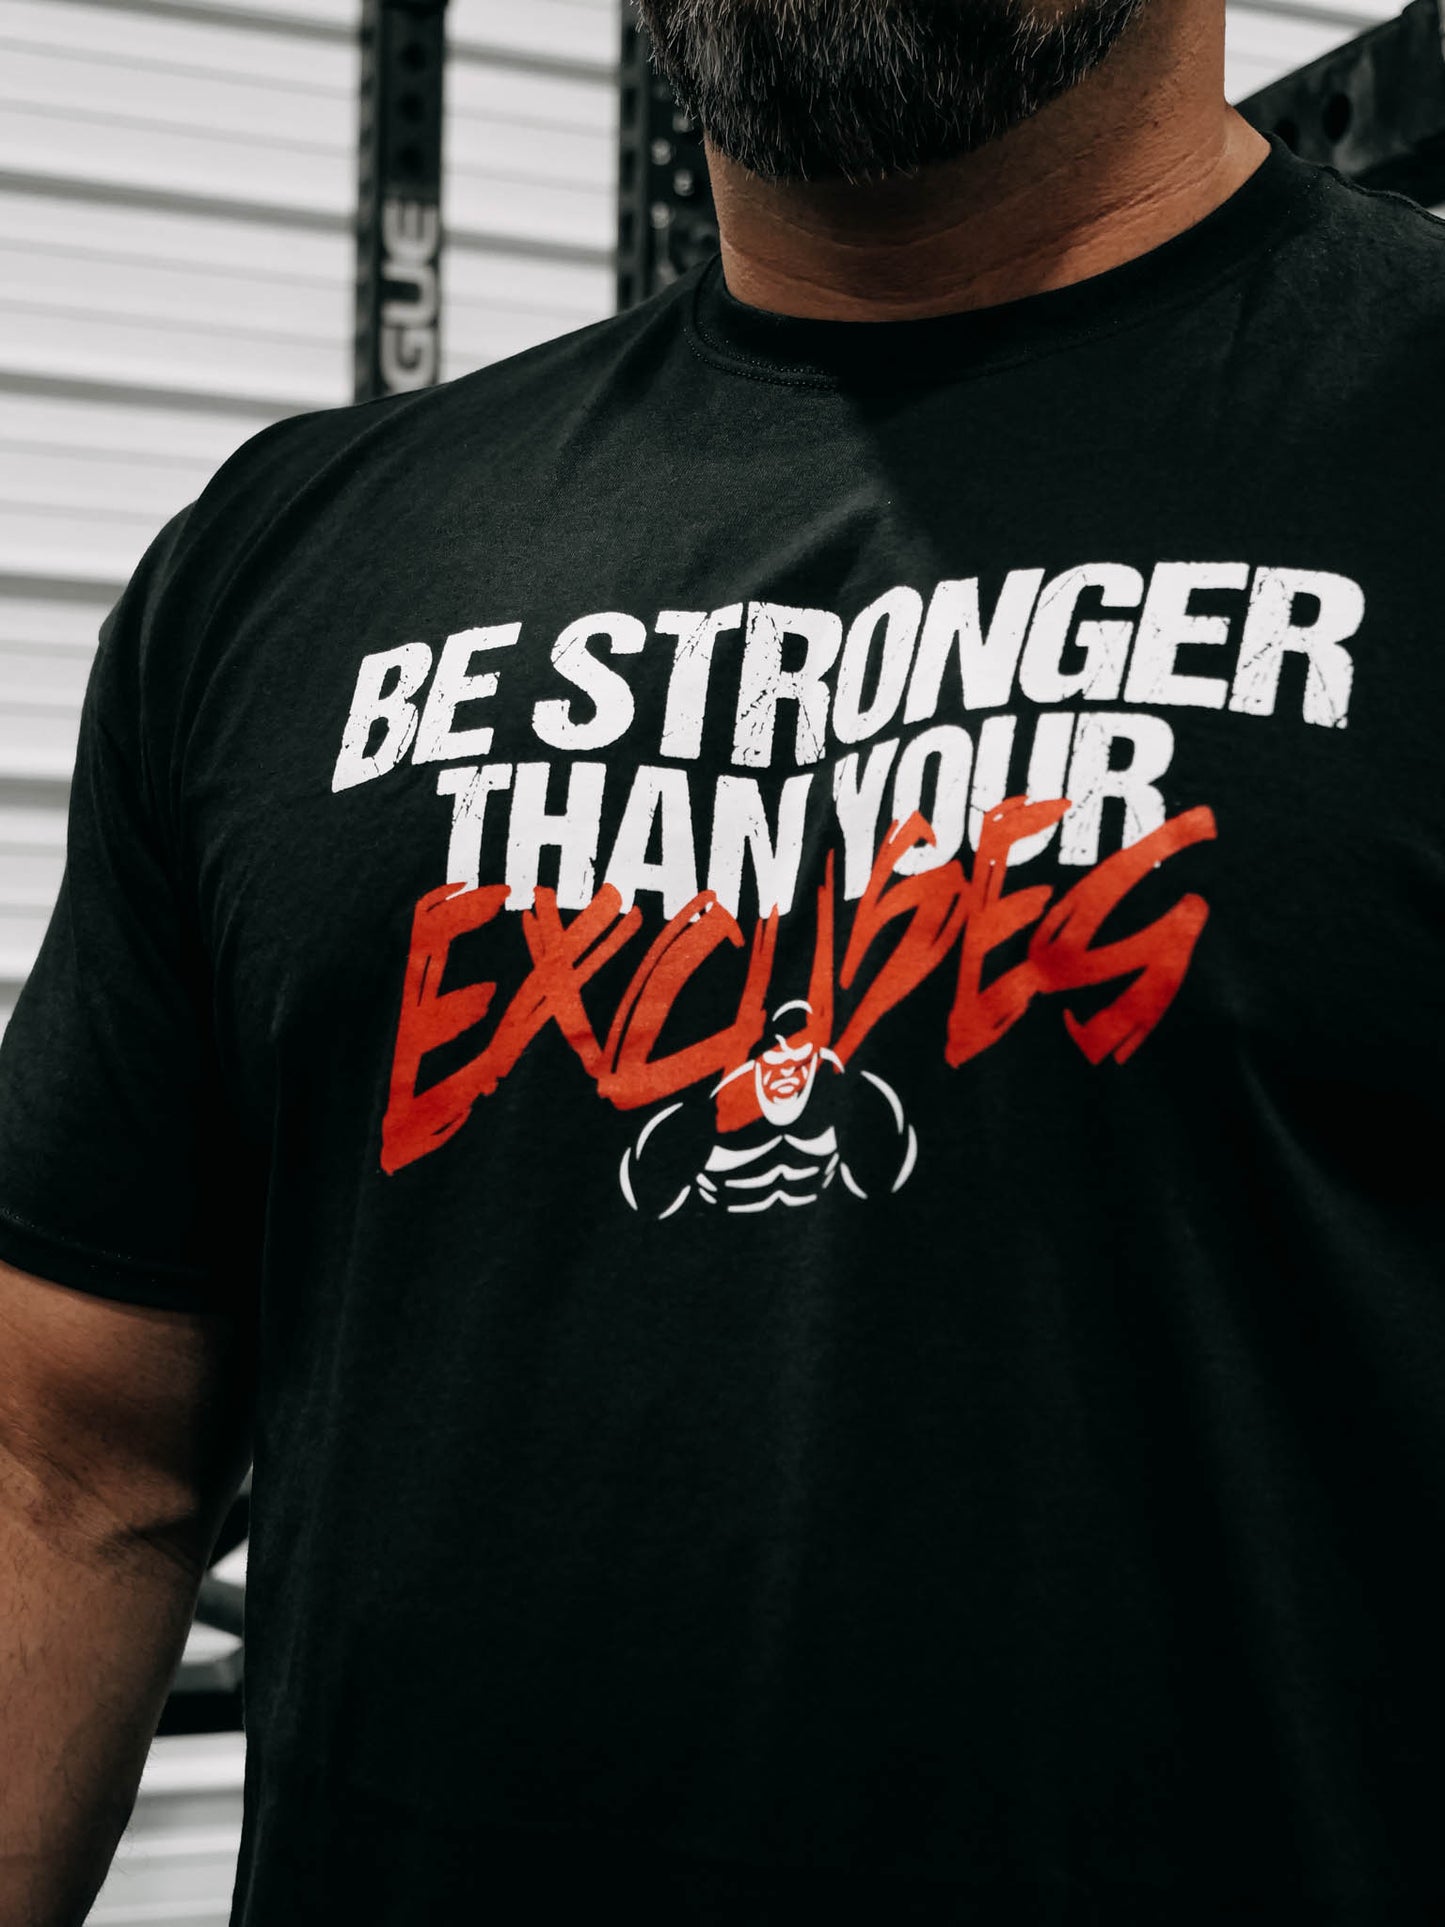 STRONGER THAN YOUR EXCUSES – Shaw Strength